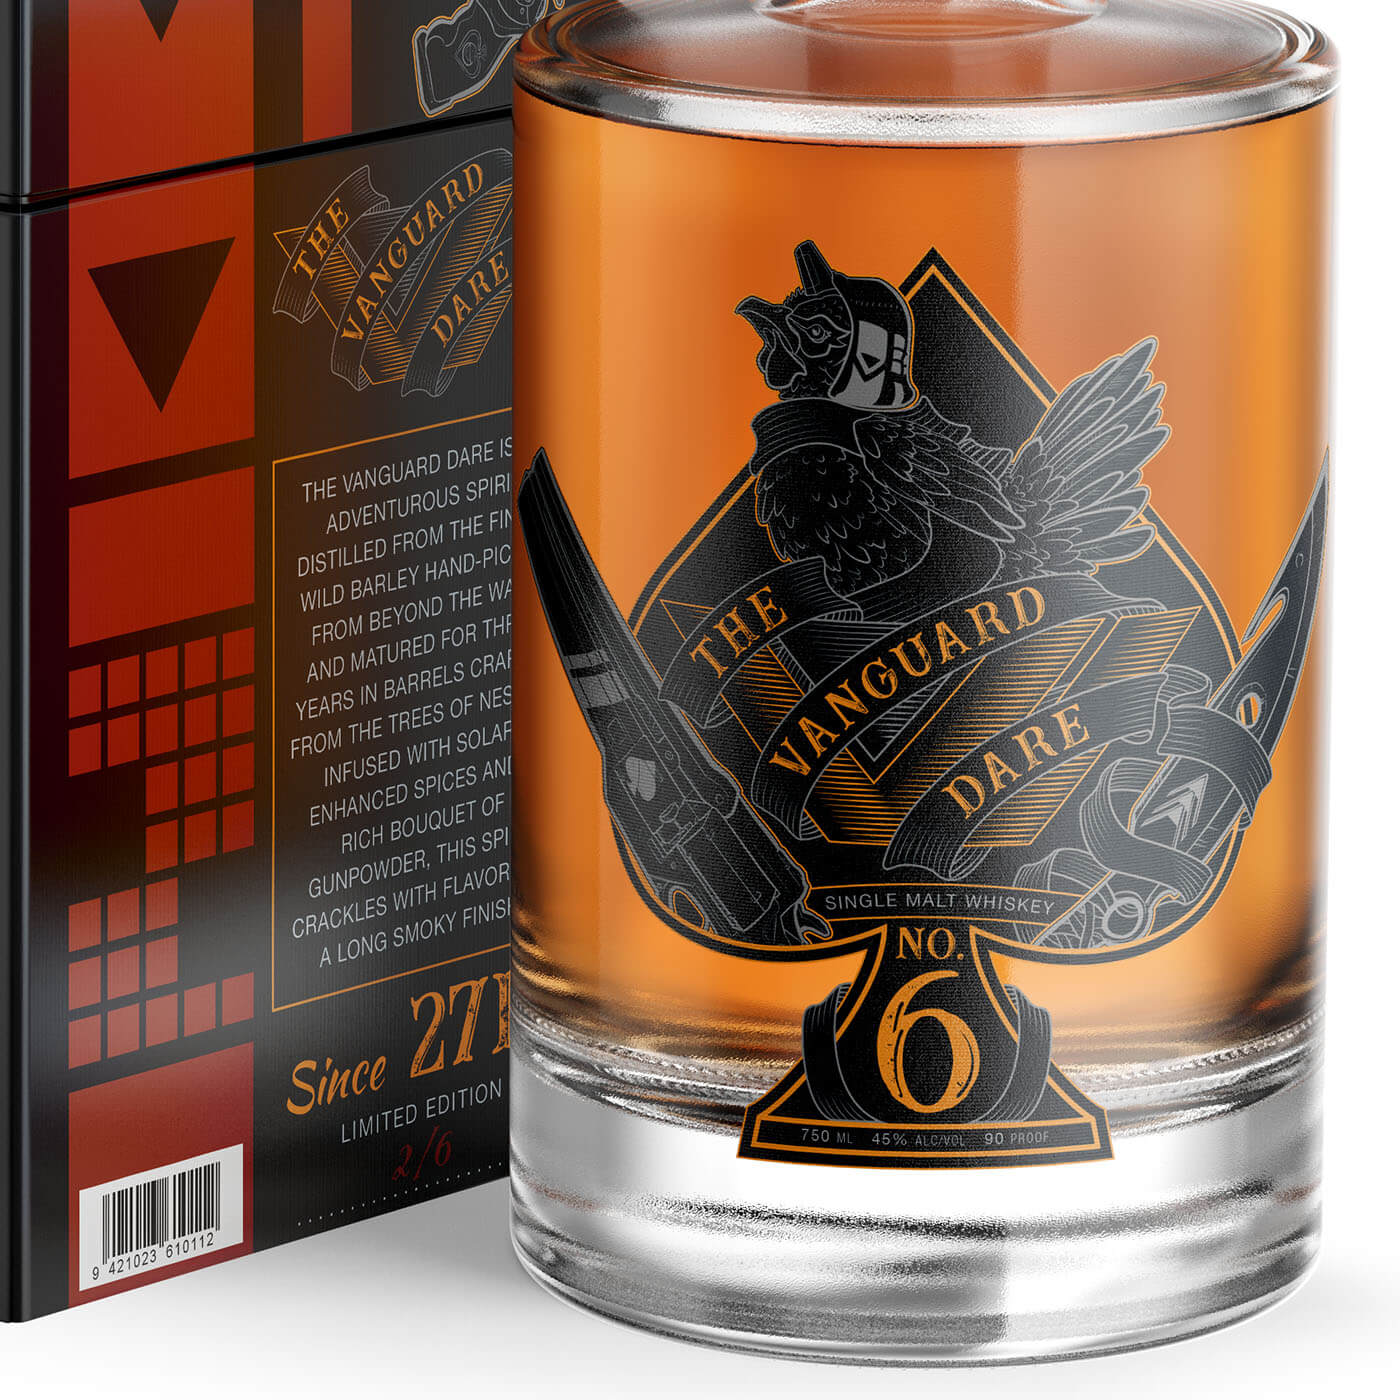 Close-up detail of "The Vanguard Dare" whiskey packaging project.